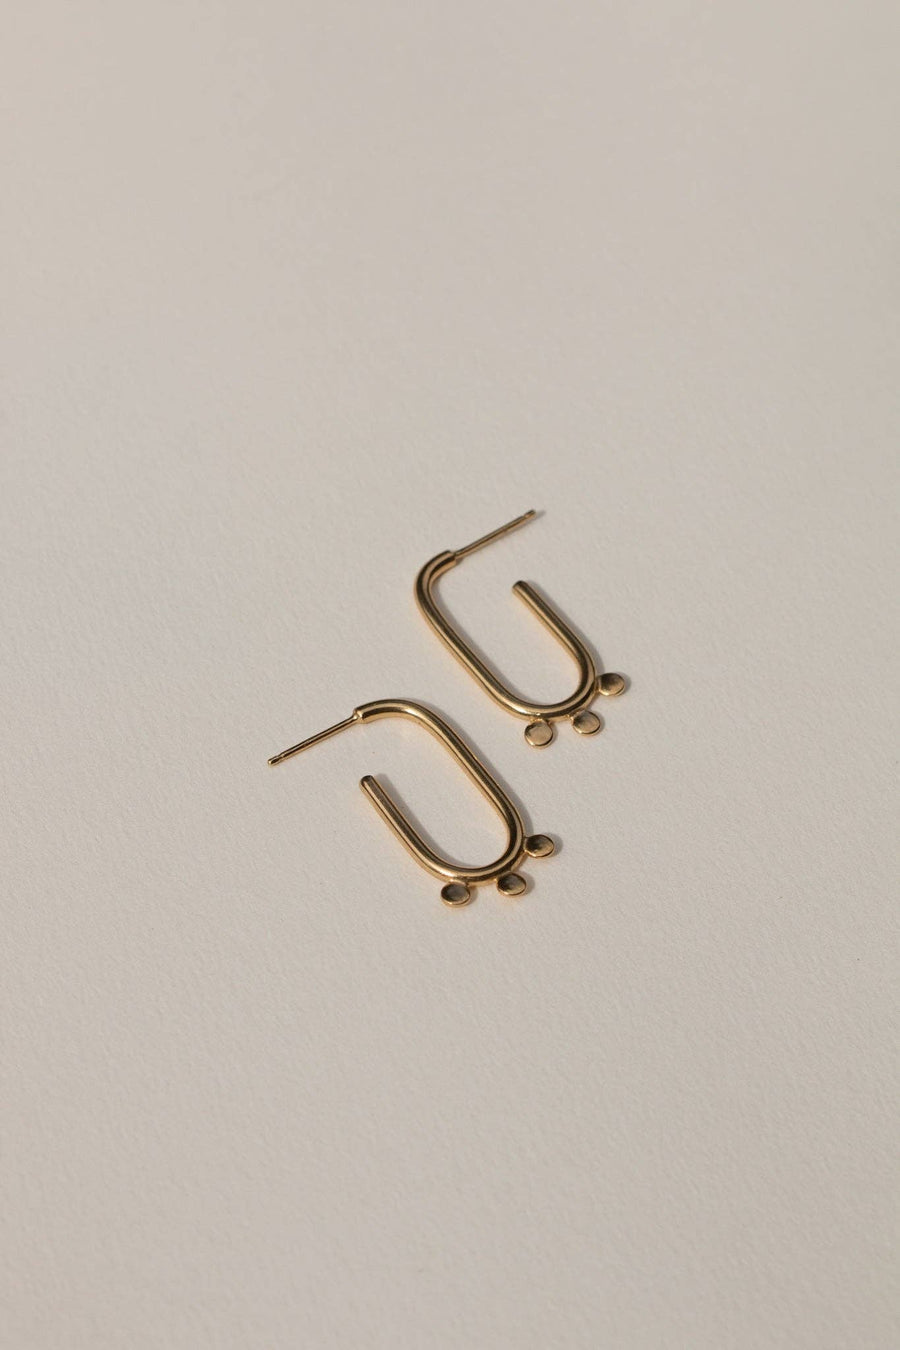 ‘Suzya' Earrings (meaning ‘Problem in Tumbuka) feature a minimal, yet striking design with three individual hand-cut discs that form together to create a contemporary hoop. Crafted from brass and sterling silver posts coated in a luxuriously thick layer of 14k recycled gold, the Suzya Earrings remind us that we can overcome any challenge that comes our way. austin small business